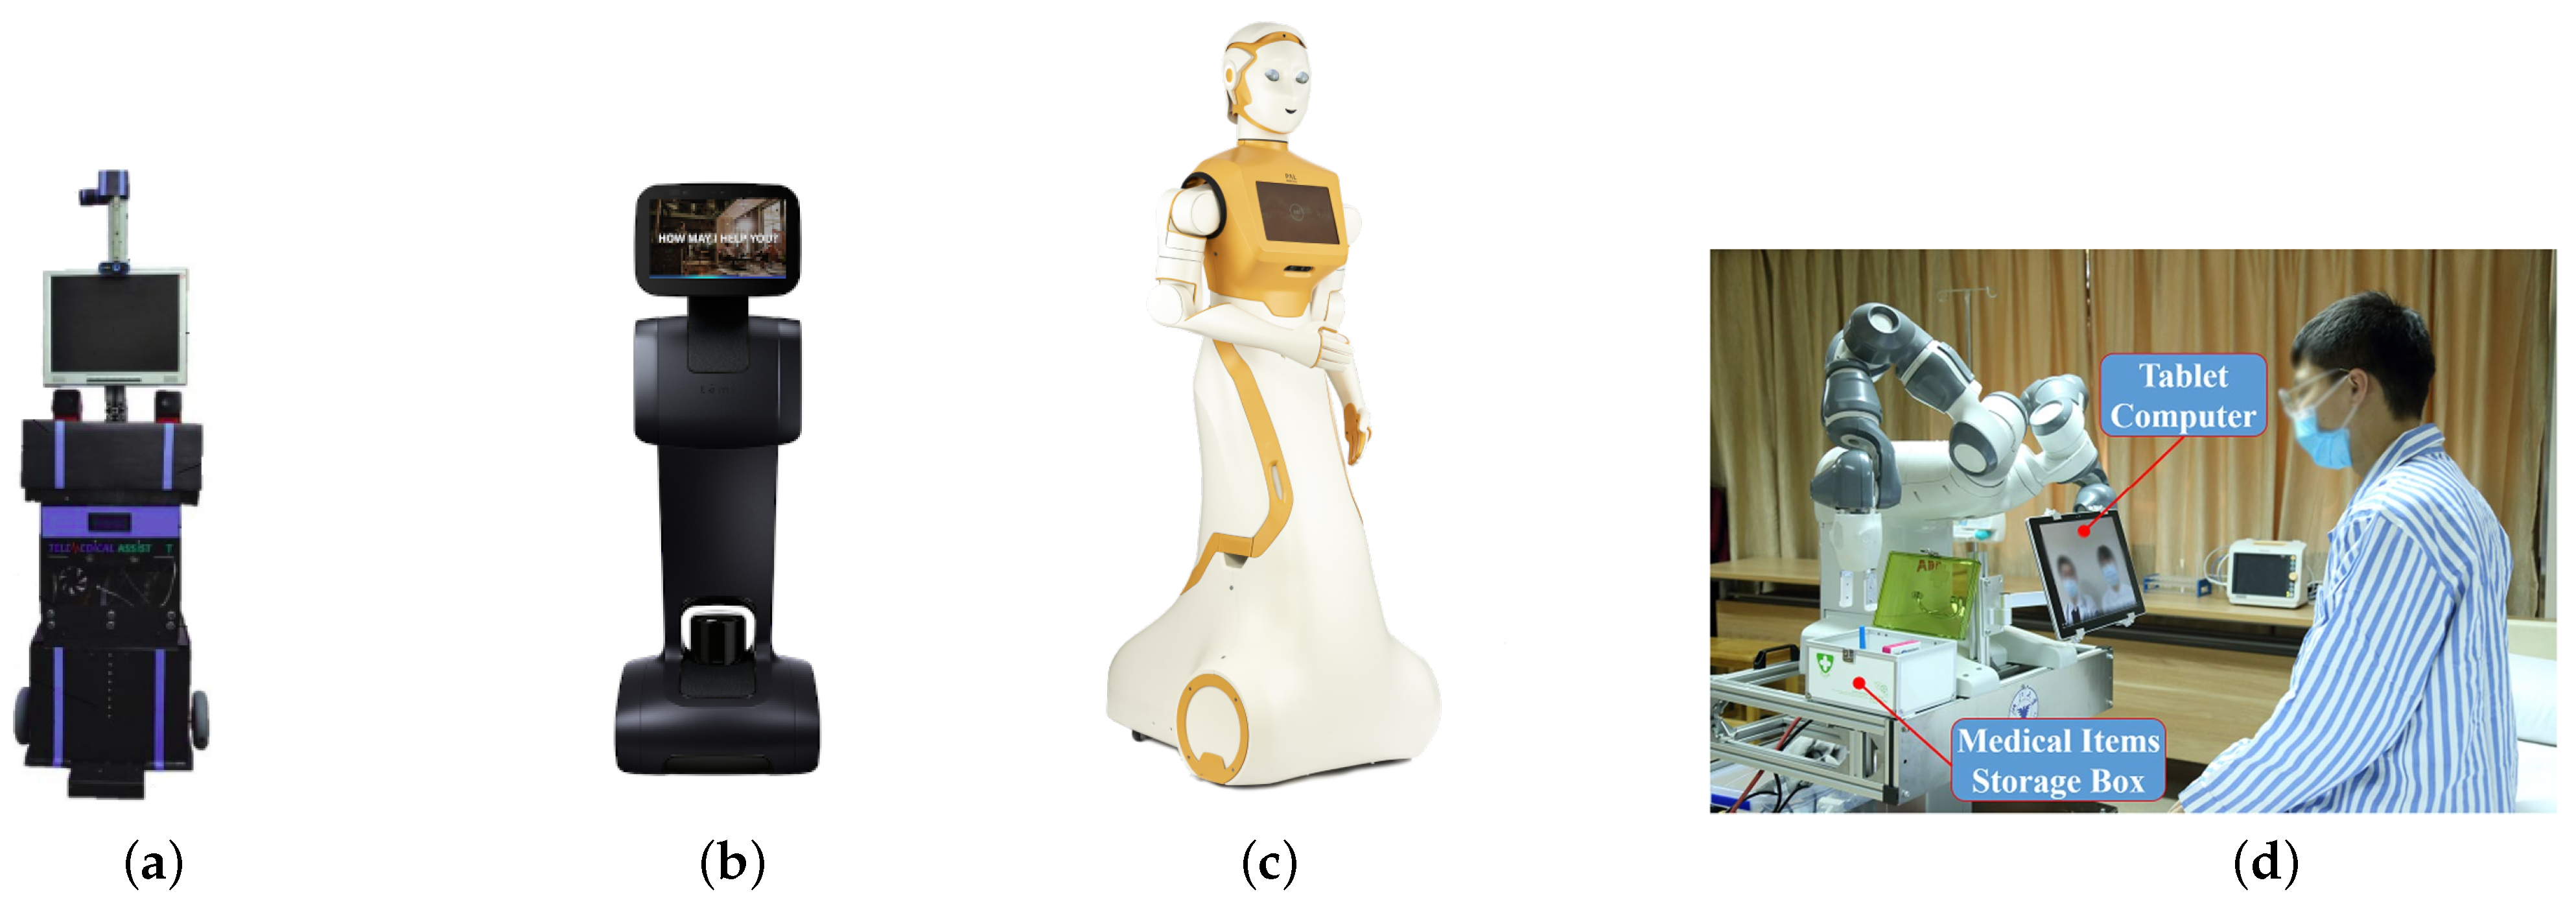 Robotics | Free Full-Text | Service Robots in the Healthcare Sector | HTML